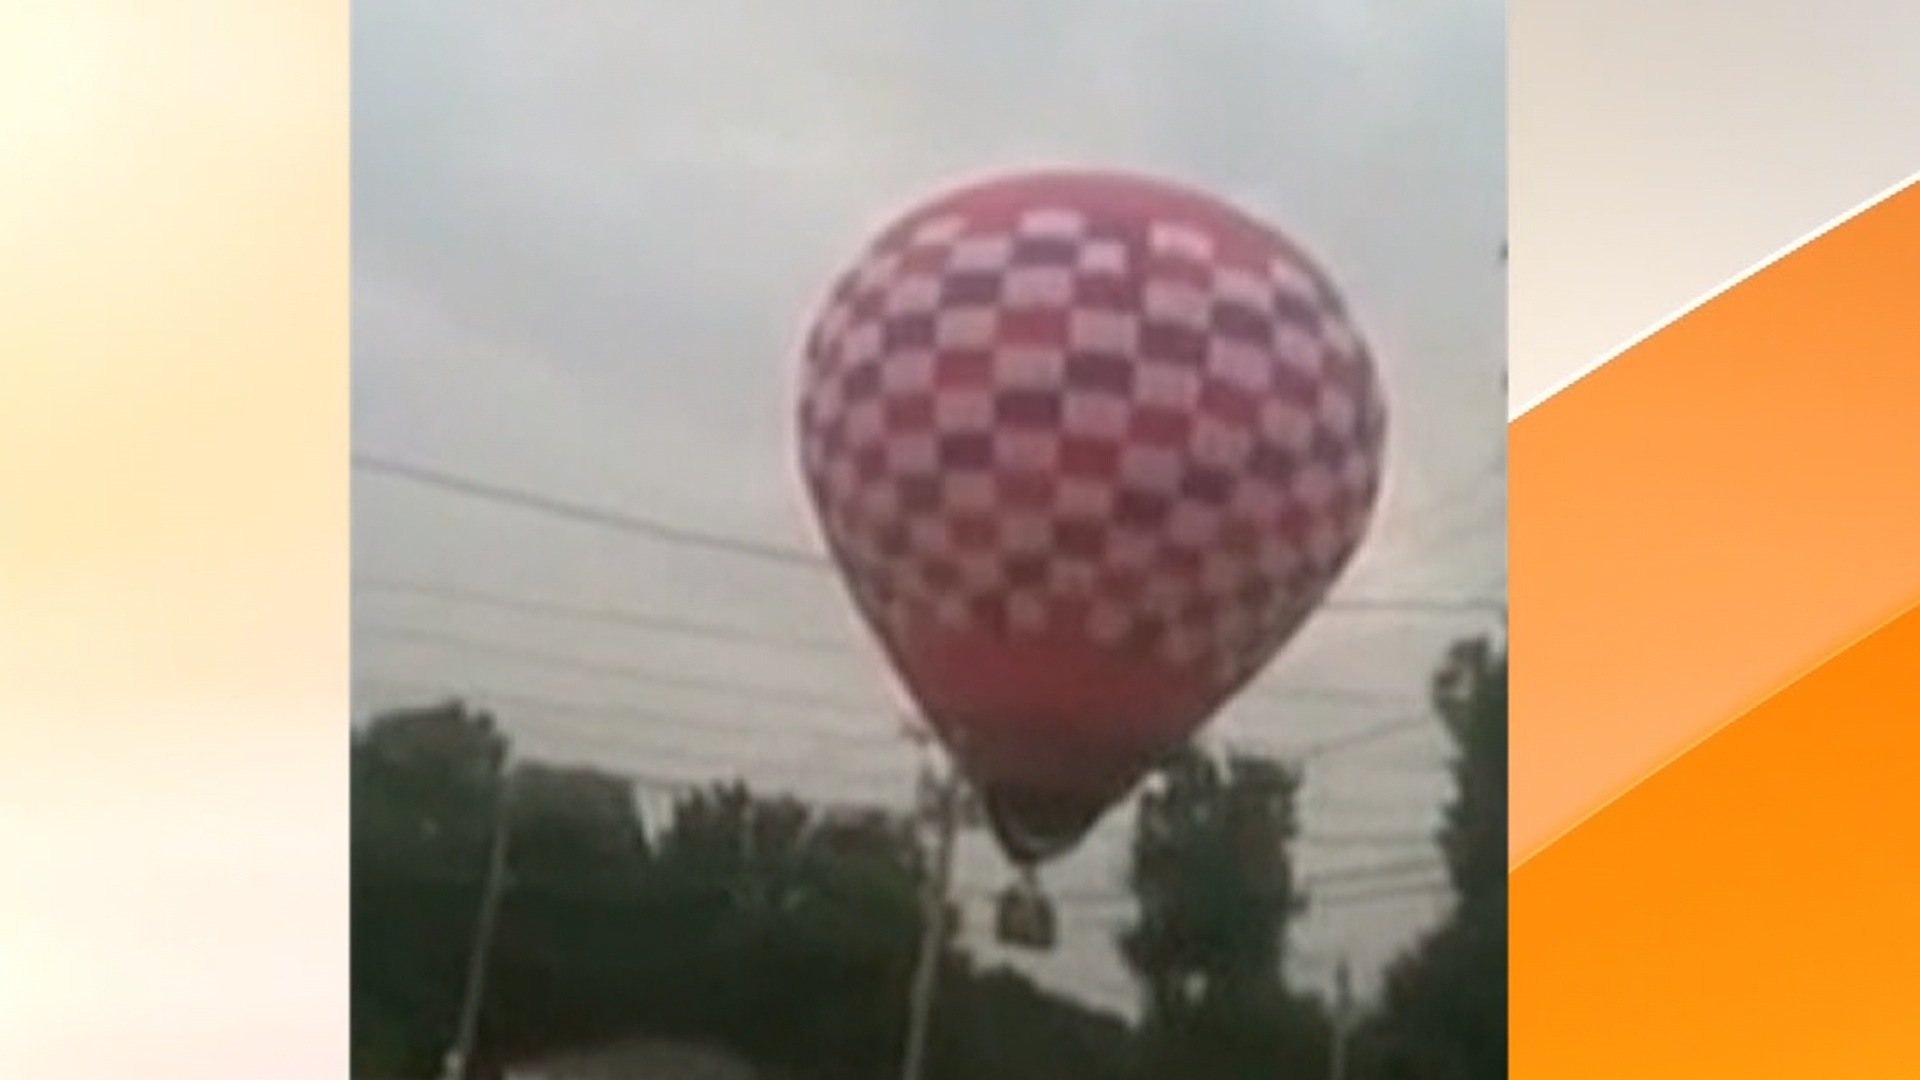 Hot air balloon crashes into power lines - TODAY.com1920 x 1080